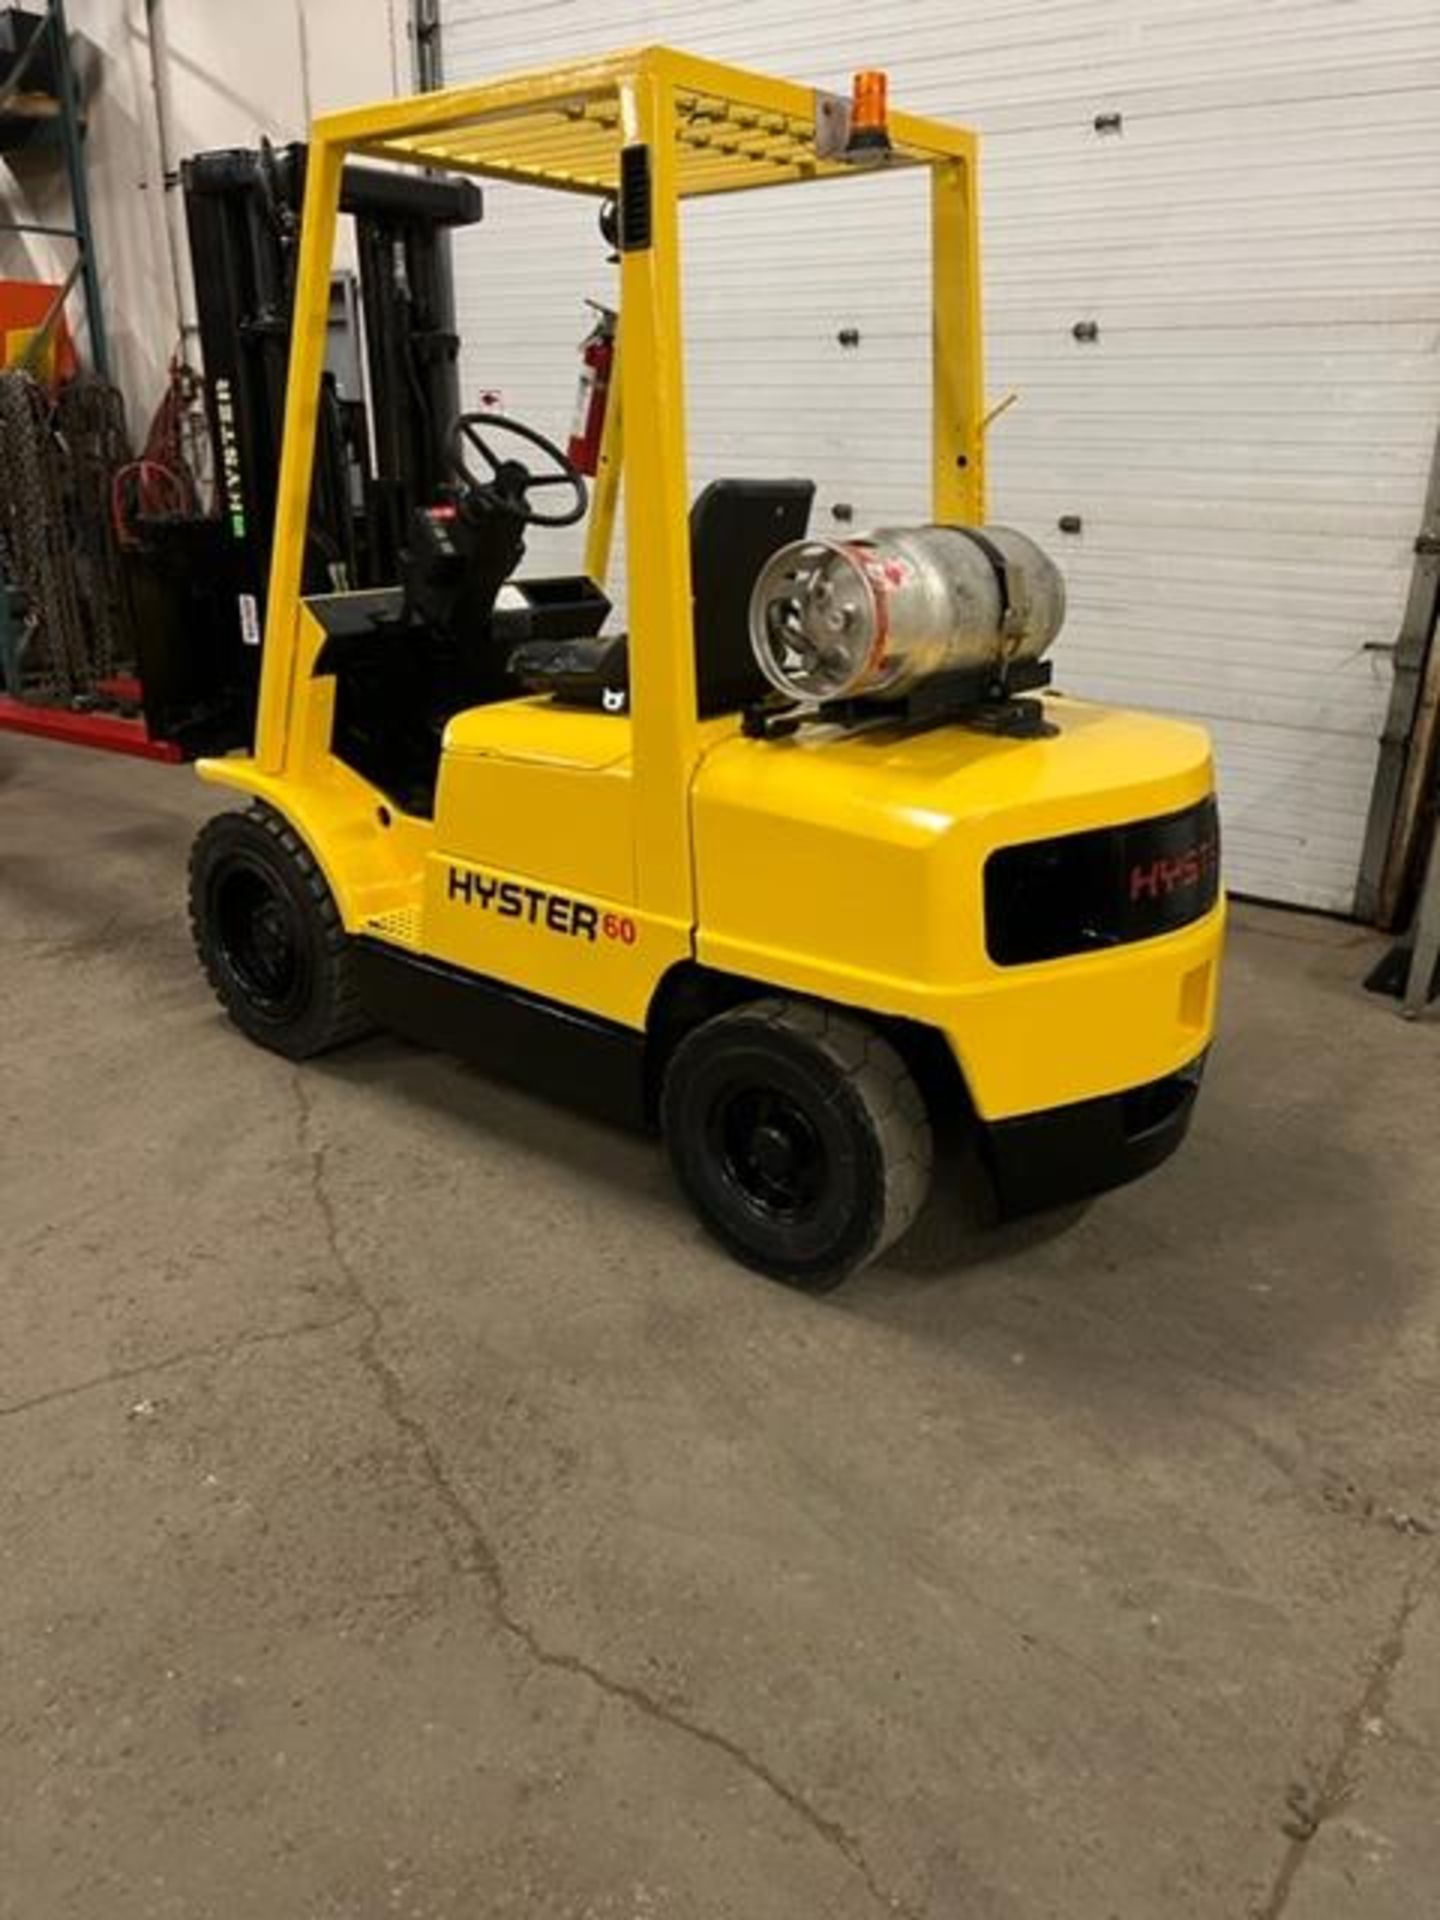 FREE CUSTOMS - NICE Hyster H60 6,000lbs Capacity OUTDOOR Forklift LPG (propane) with SIDESHIFT & 60" - Image 3 of 3